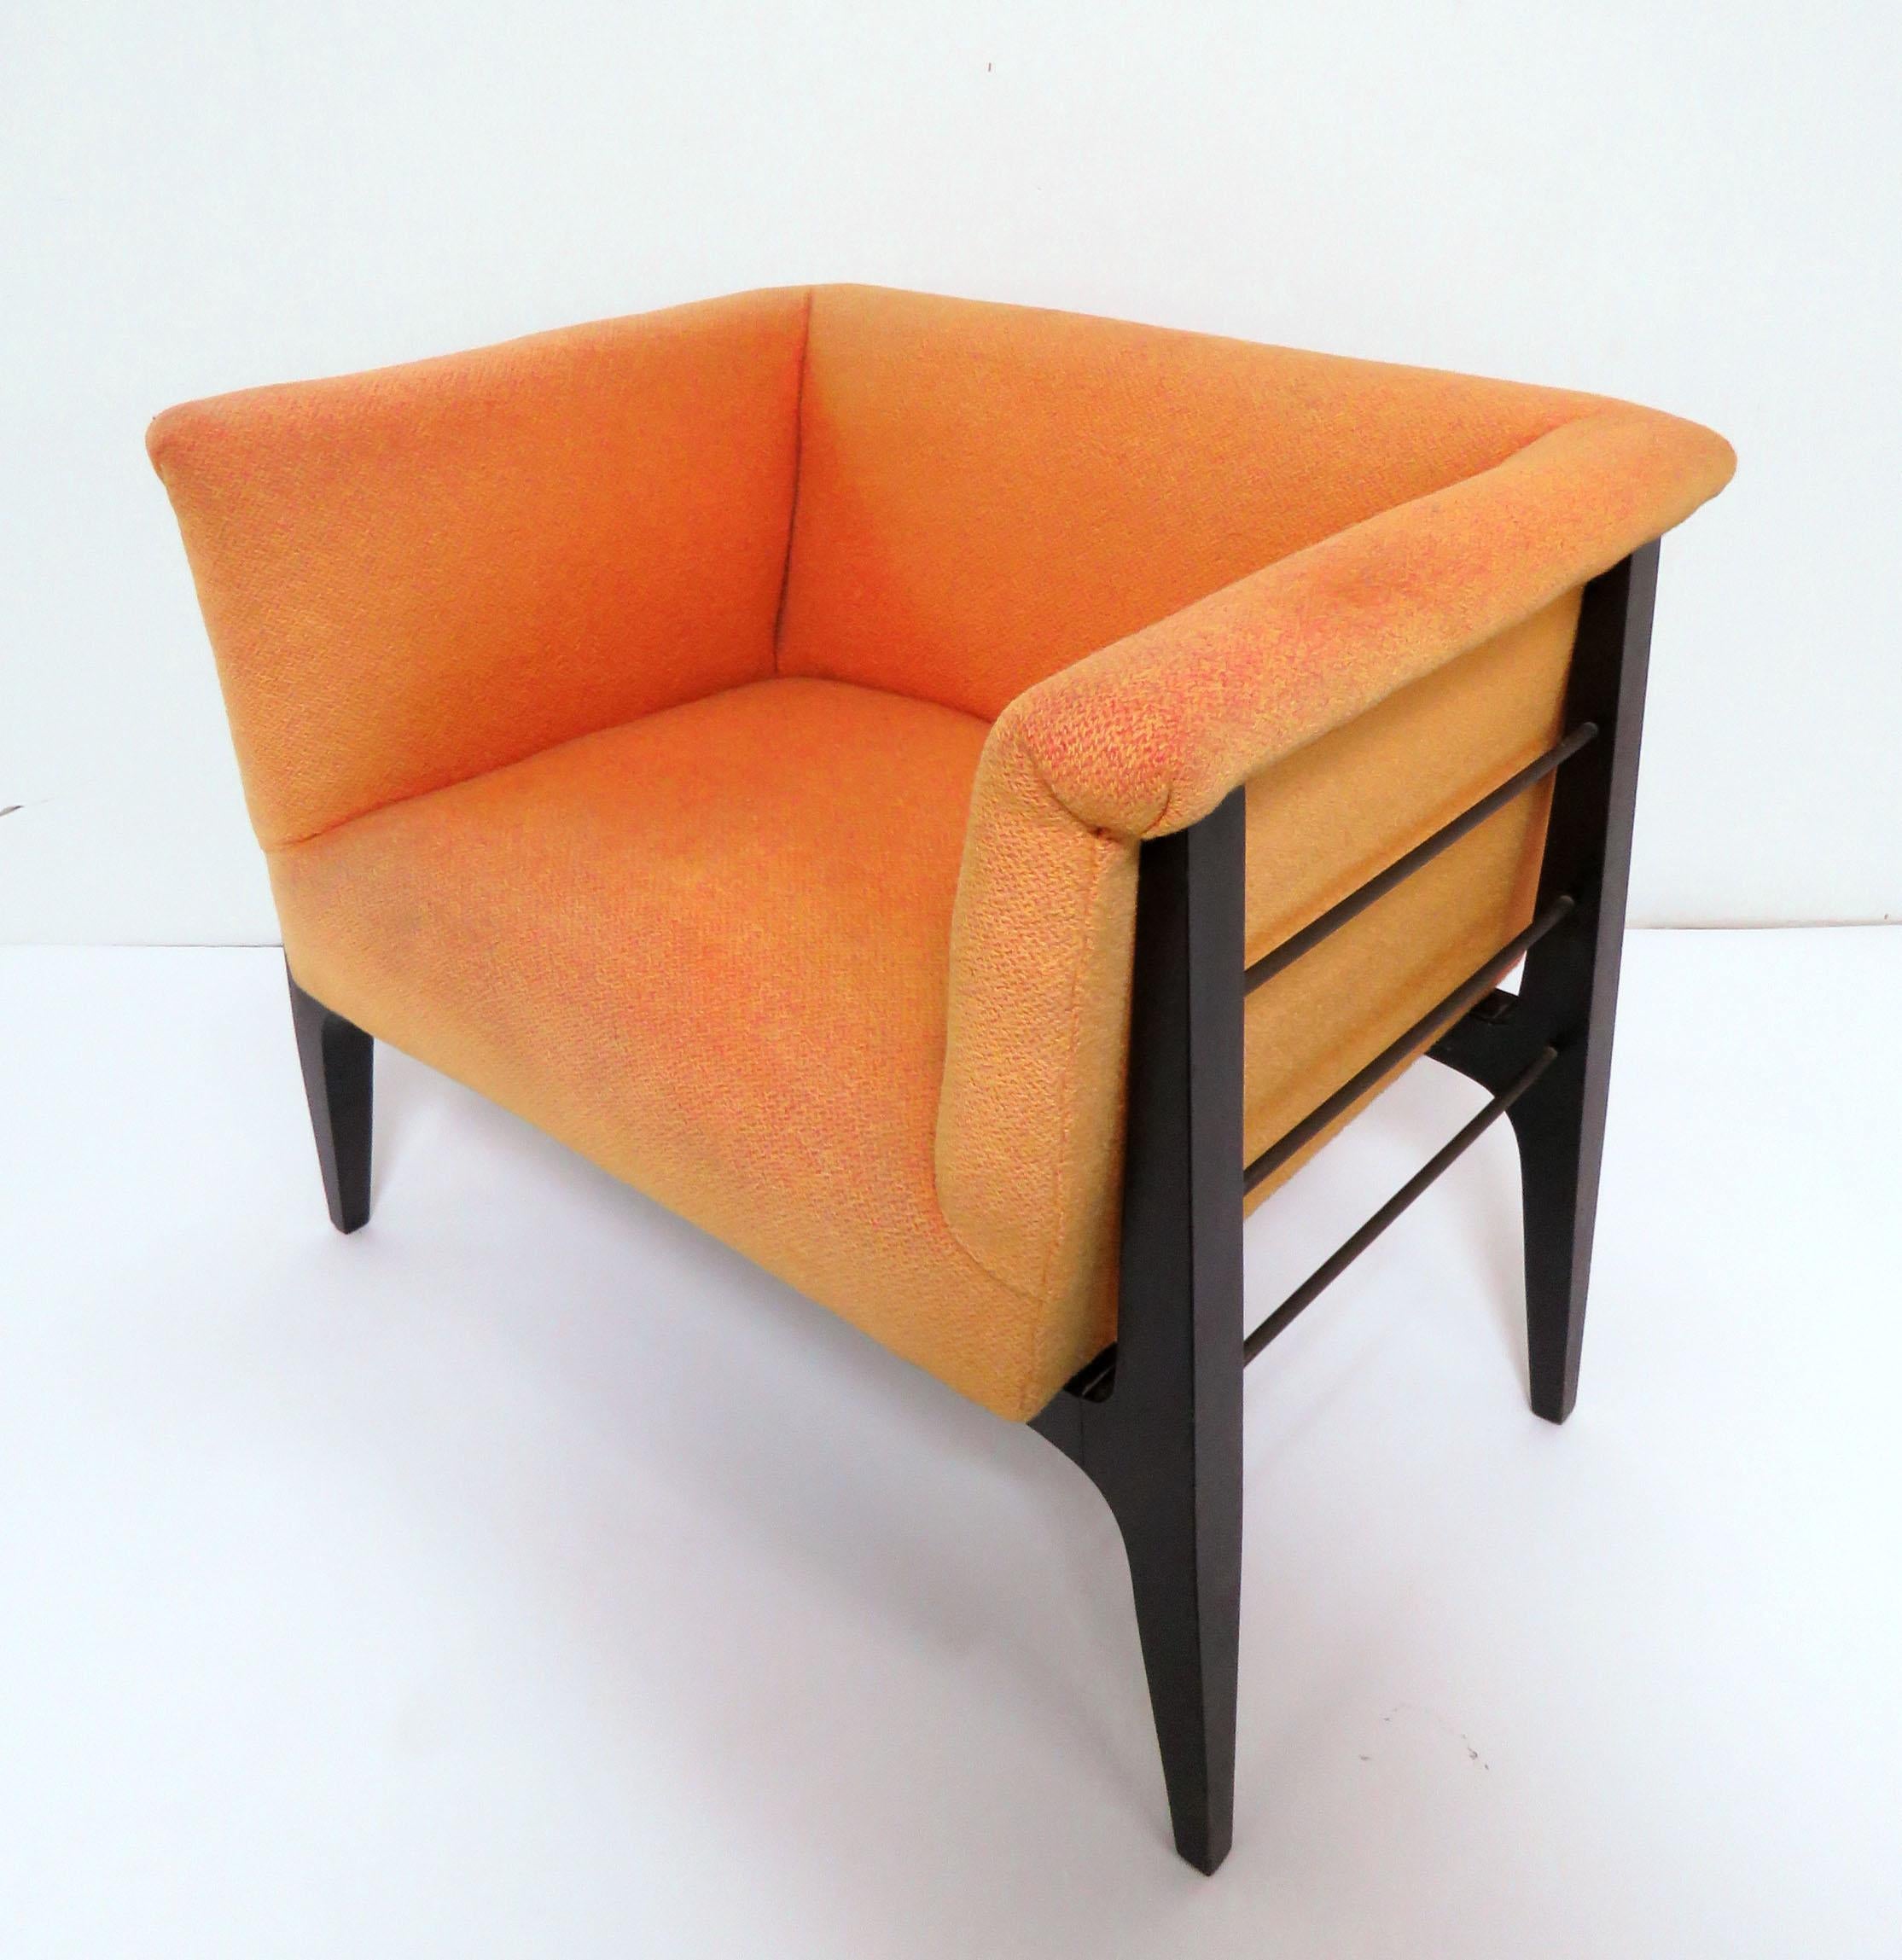 Angular midcentury lounge chair with ebonized lacquered frame, accented by brass rods. Unknown maker, in style of Harvey Probber.